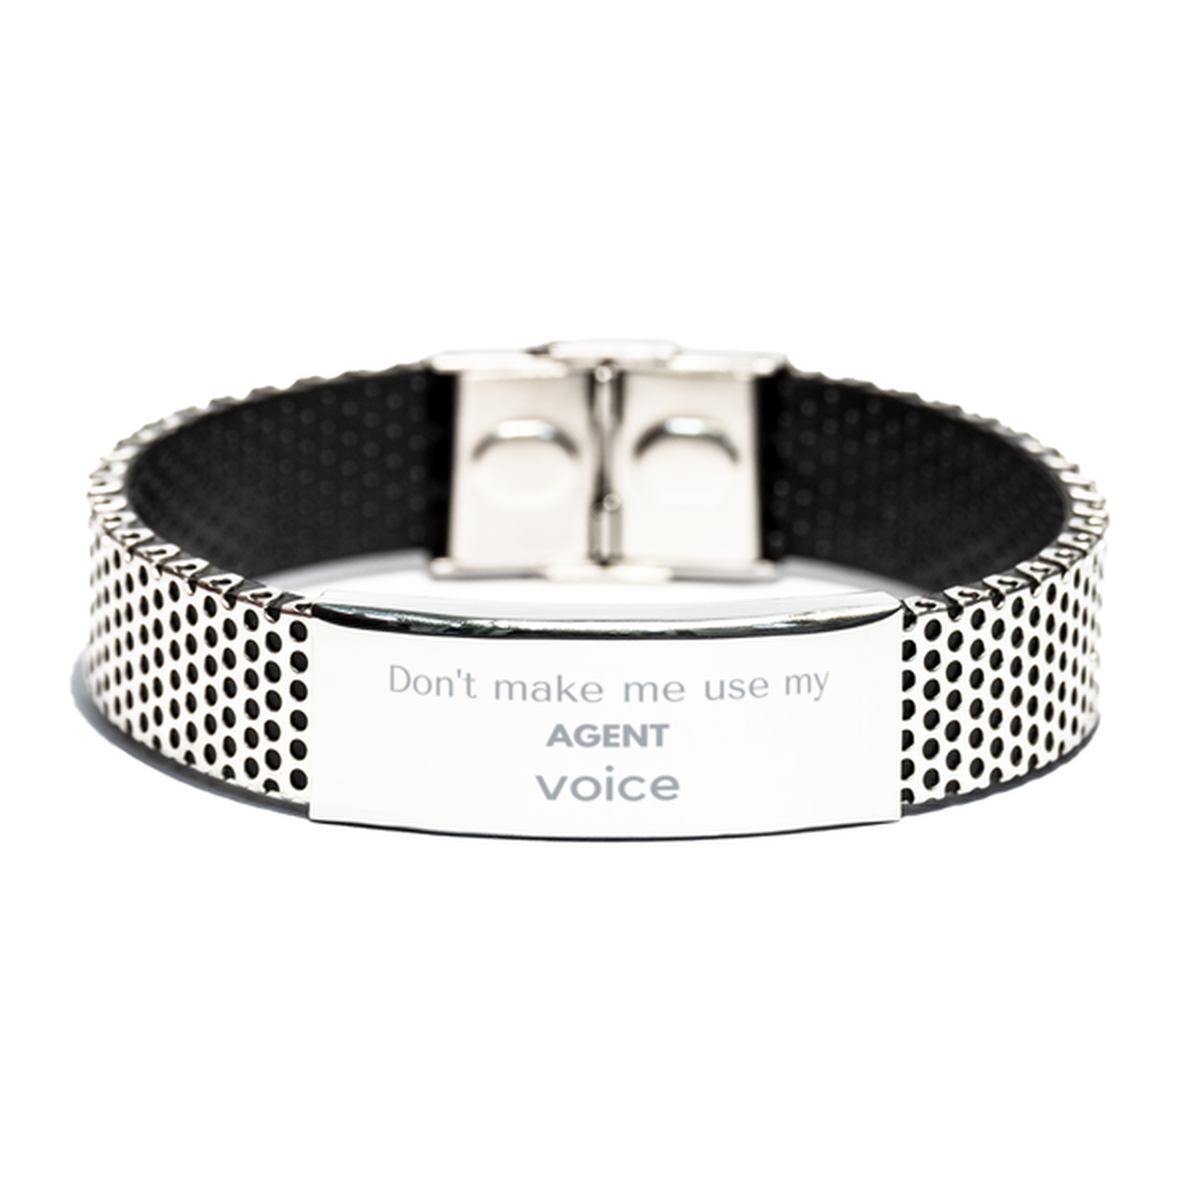 Don't make me use my Agent voice, Sarcasm Agent Gifts, Christmas Agent Stainless Steel Bracelet Birthday Unique Gifts For Agent Coworkers, Men, Women, Colleague, Friends